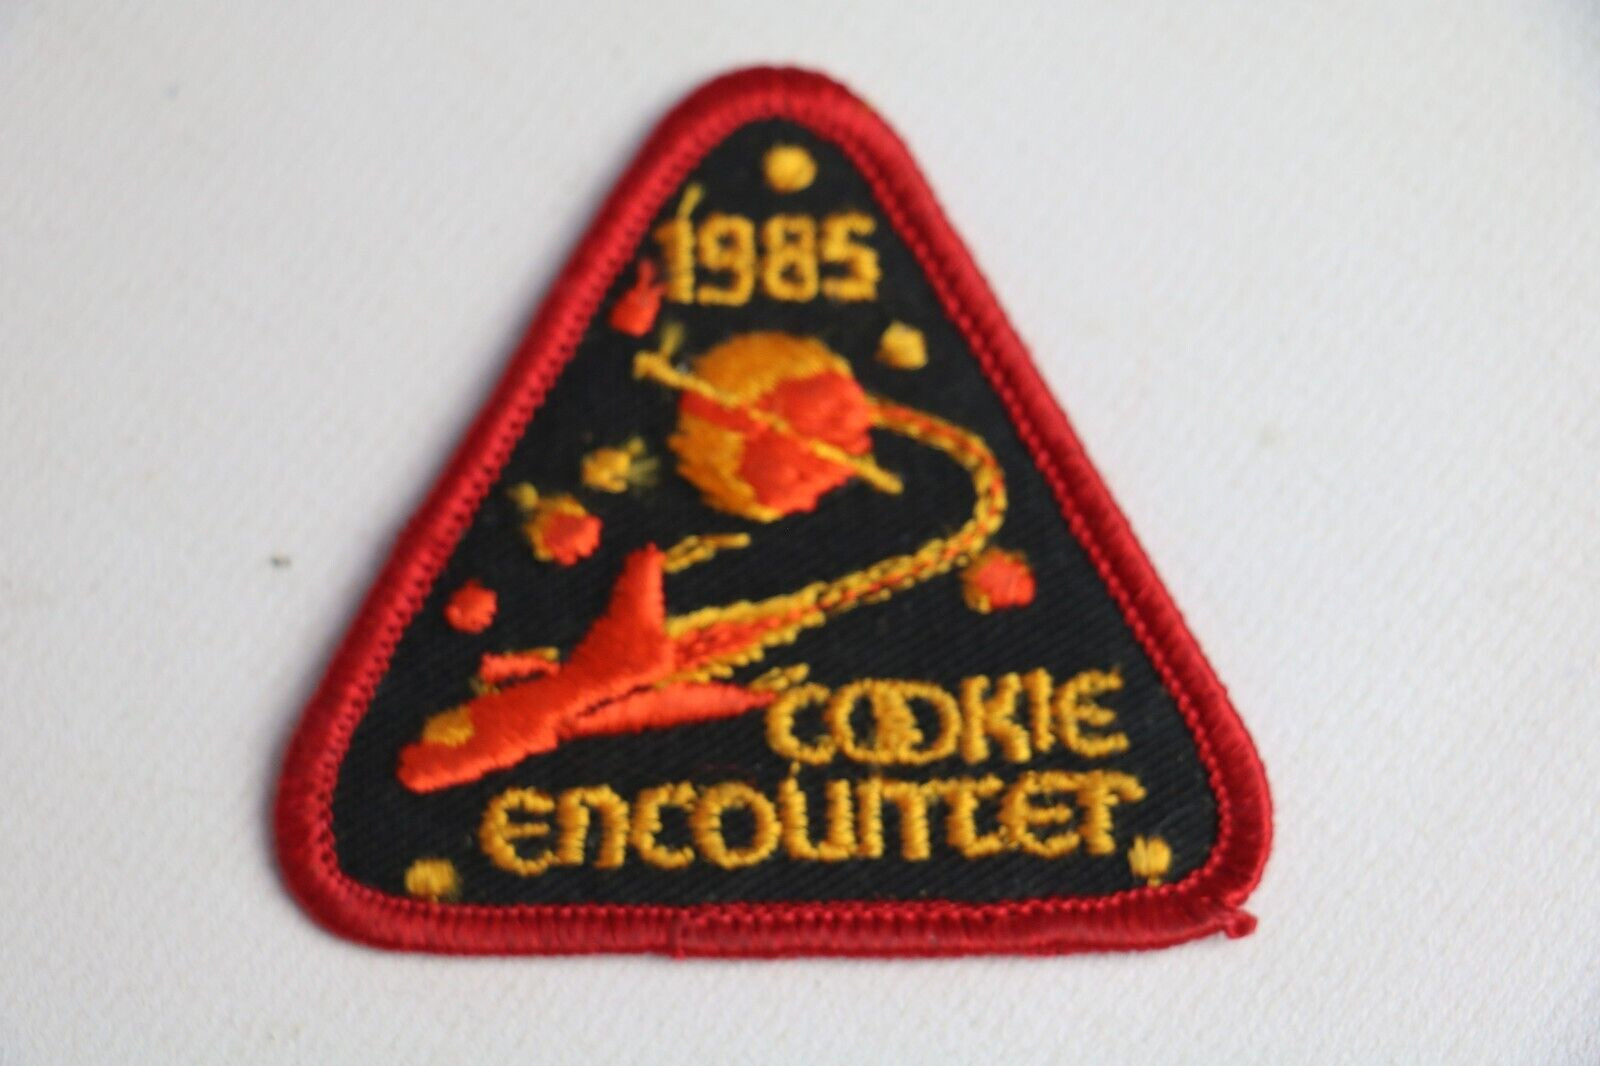 Vintage Girl Scouts 1985 Cookie Encounter Spaceship Patch 2.75\